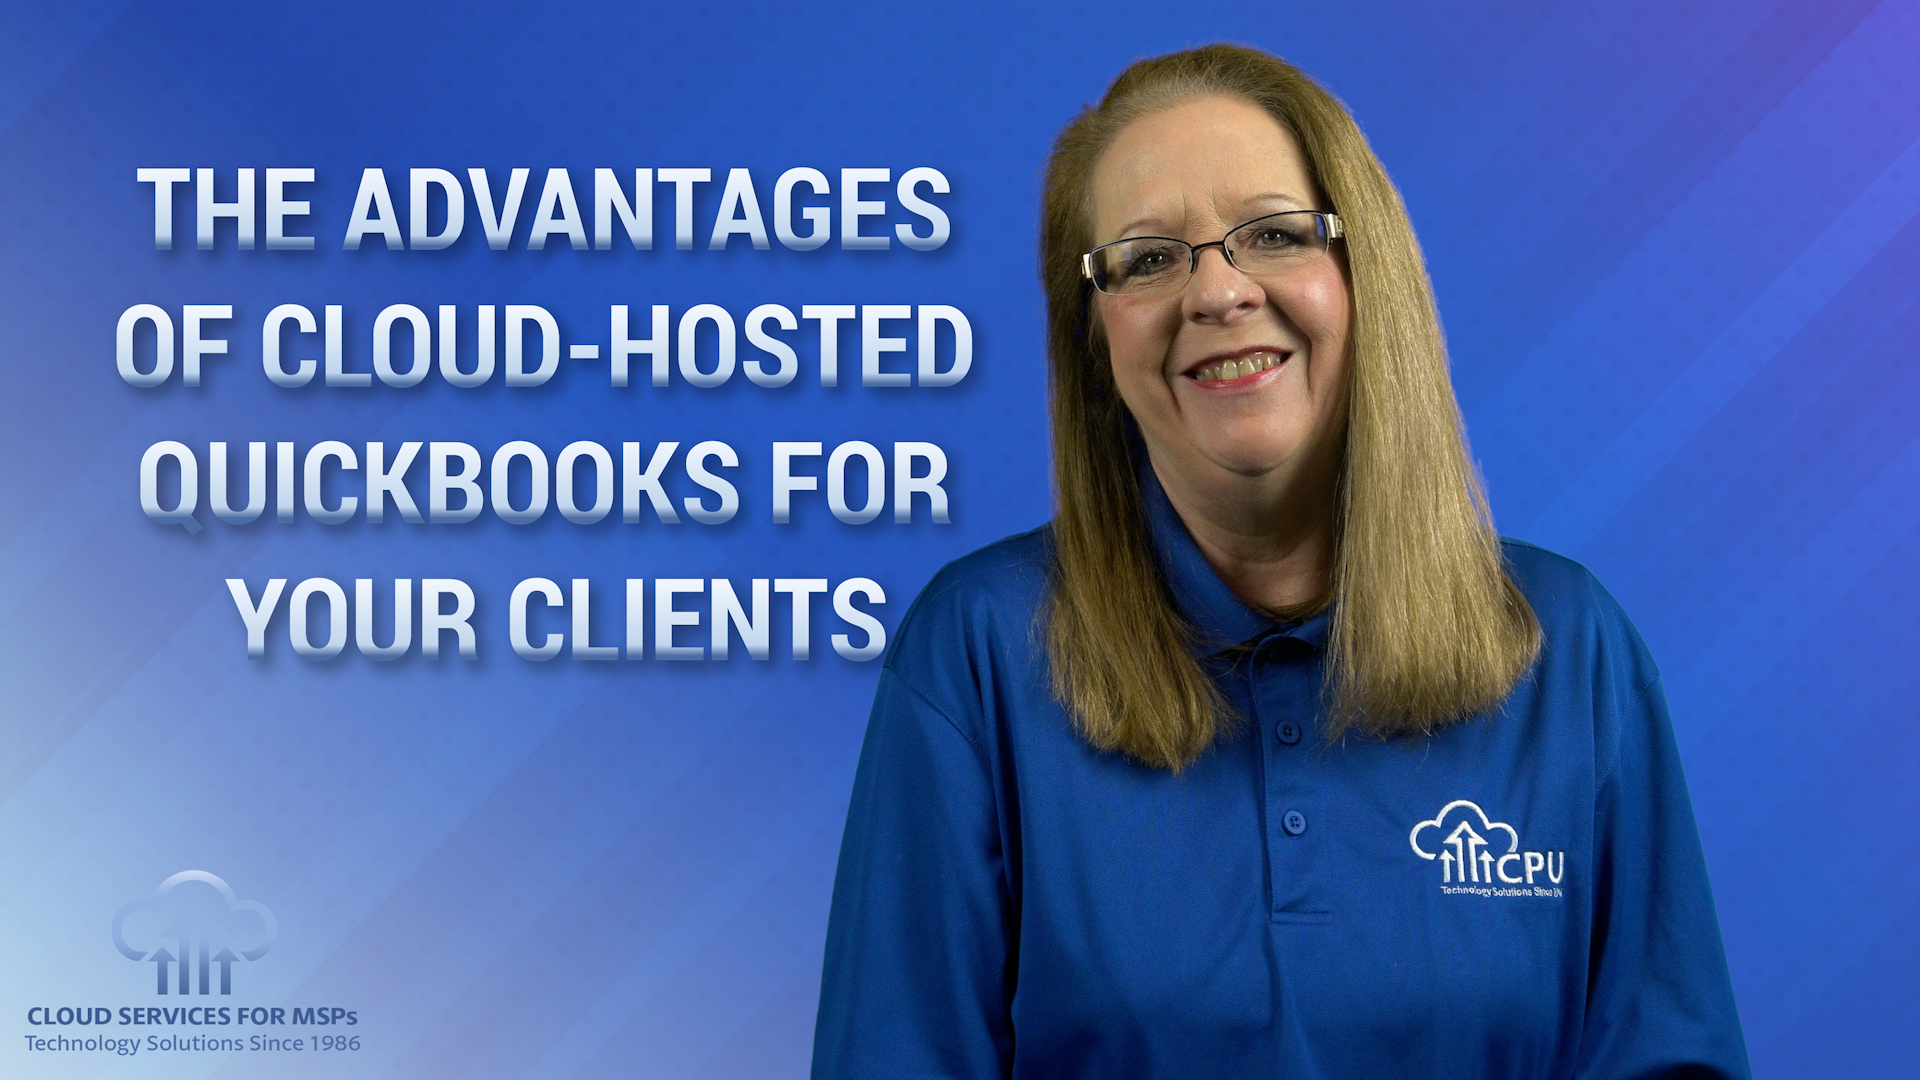 The Advantages of Cloud-Hosted QuickBooks for Your MSP Clients